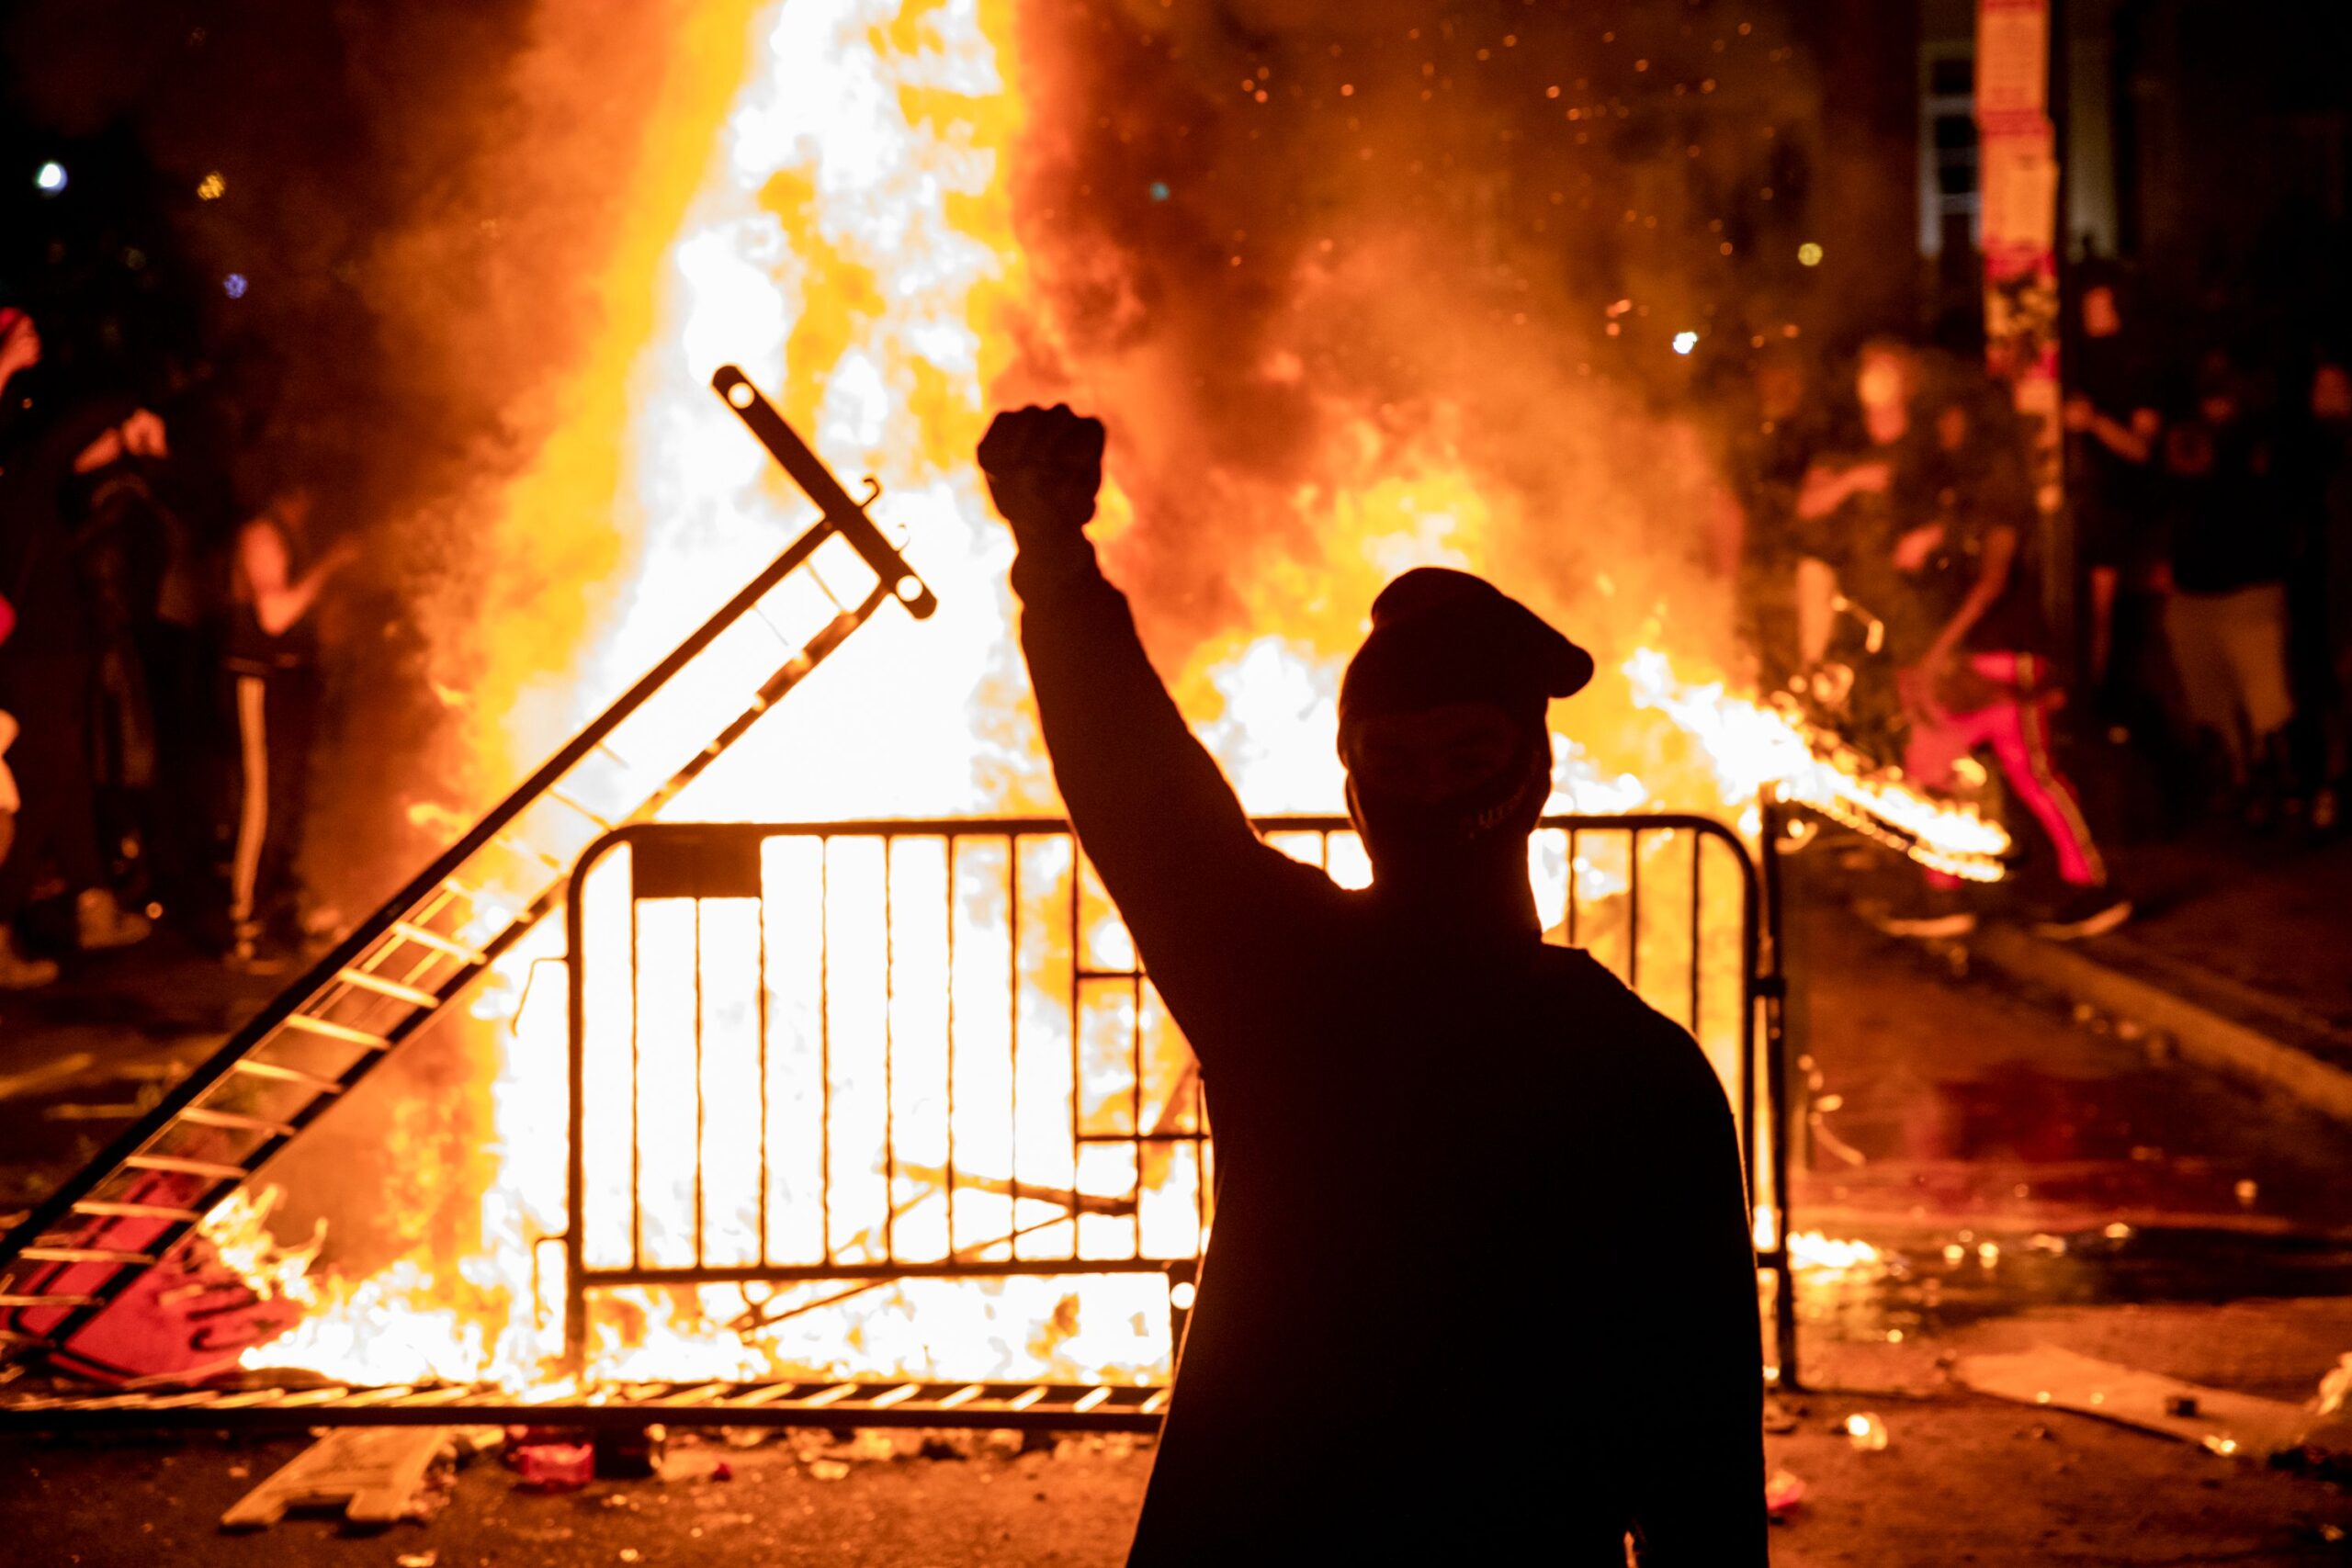 Rioters, looters could lose unemployment benefits under new bill